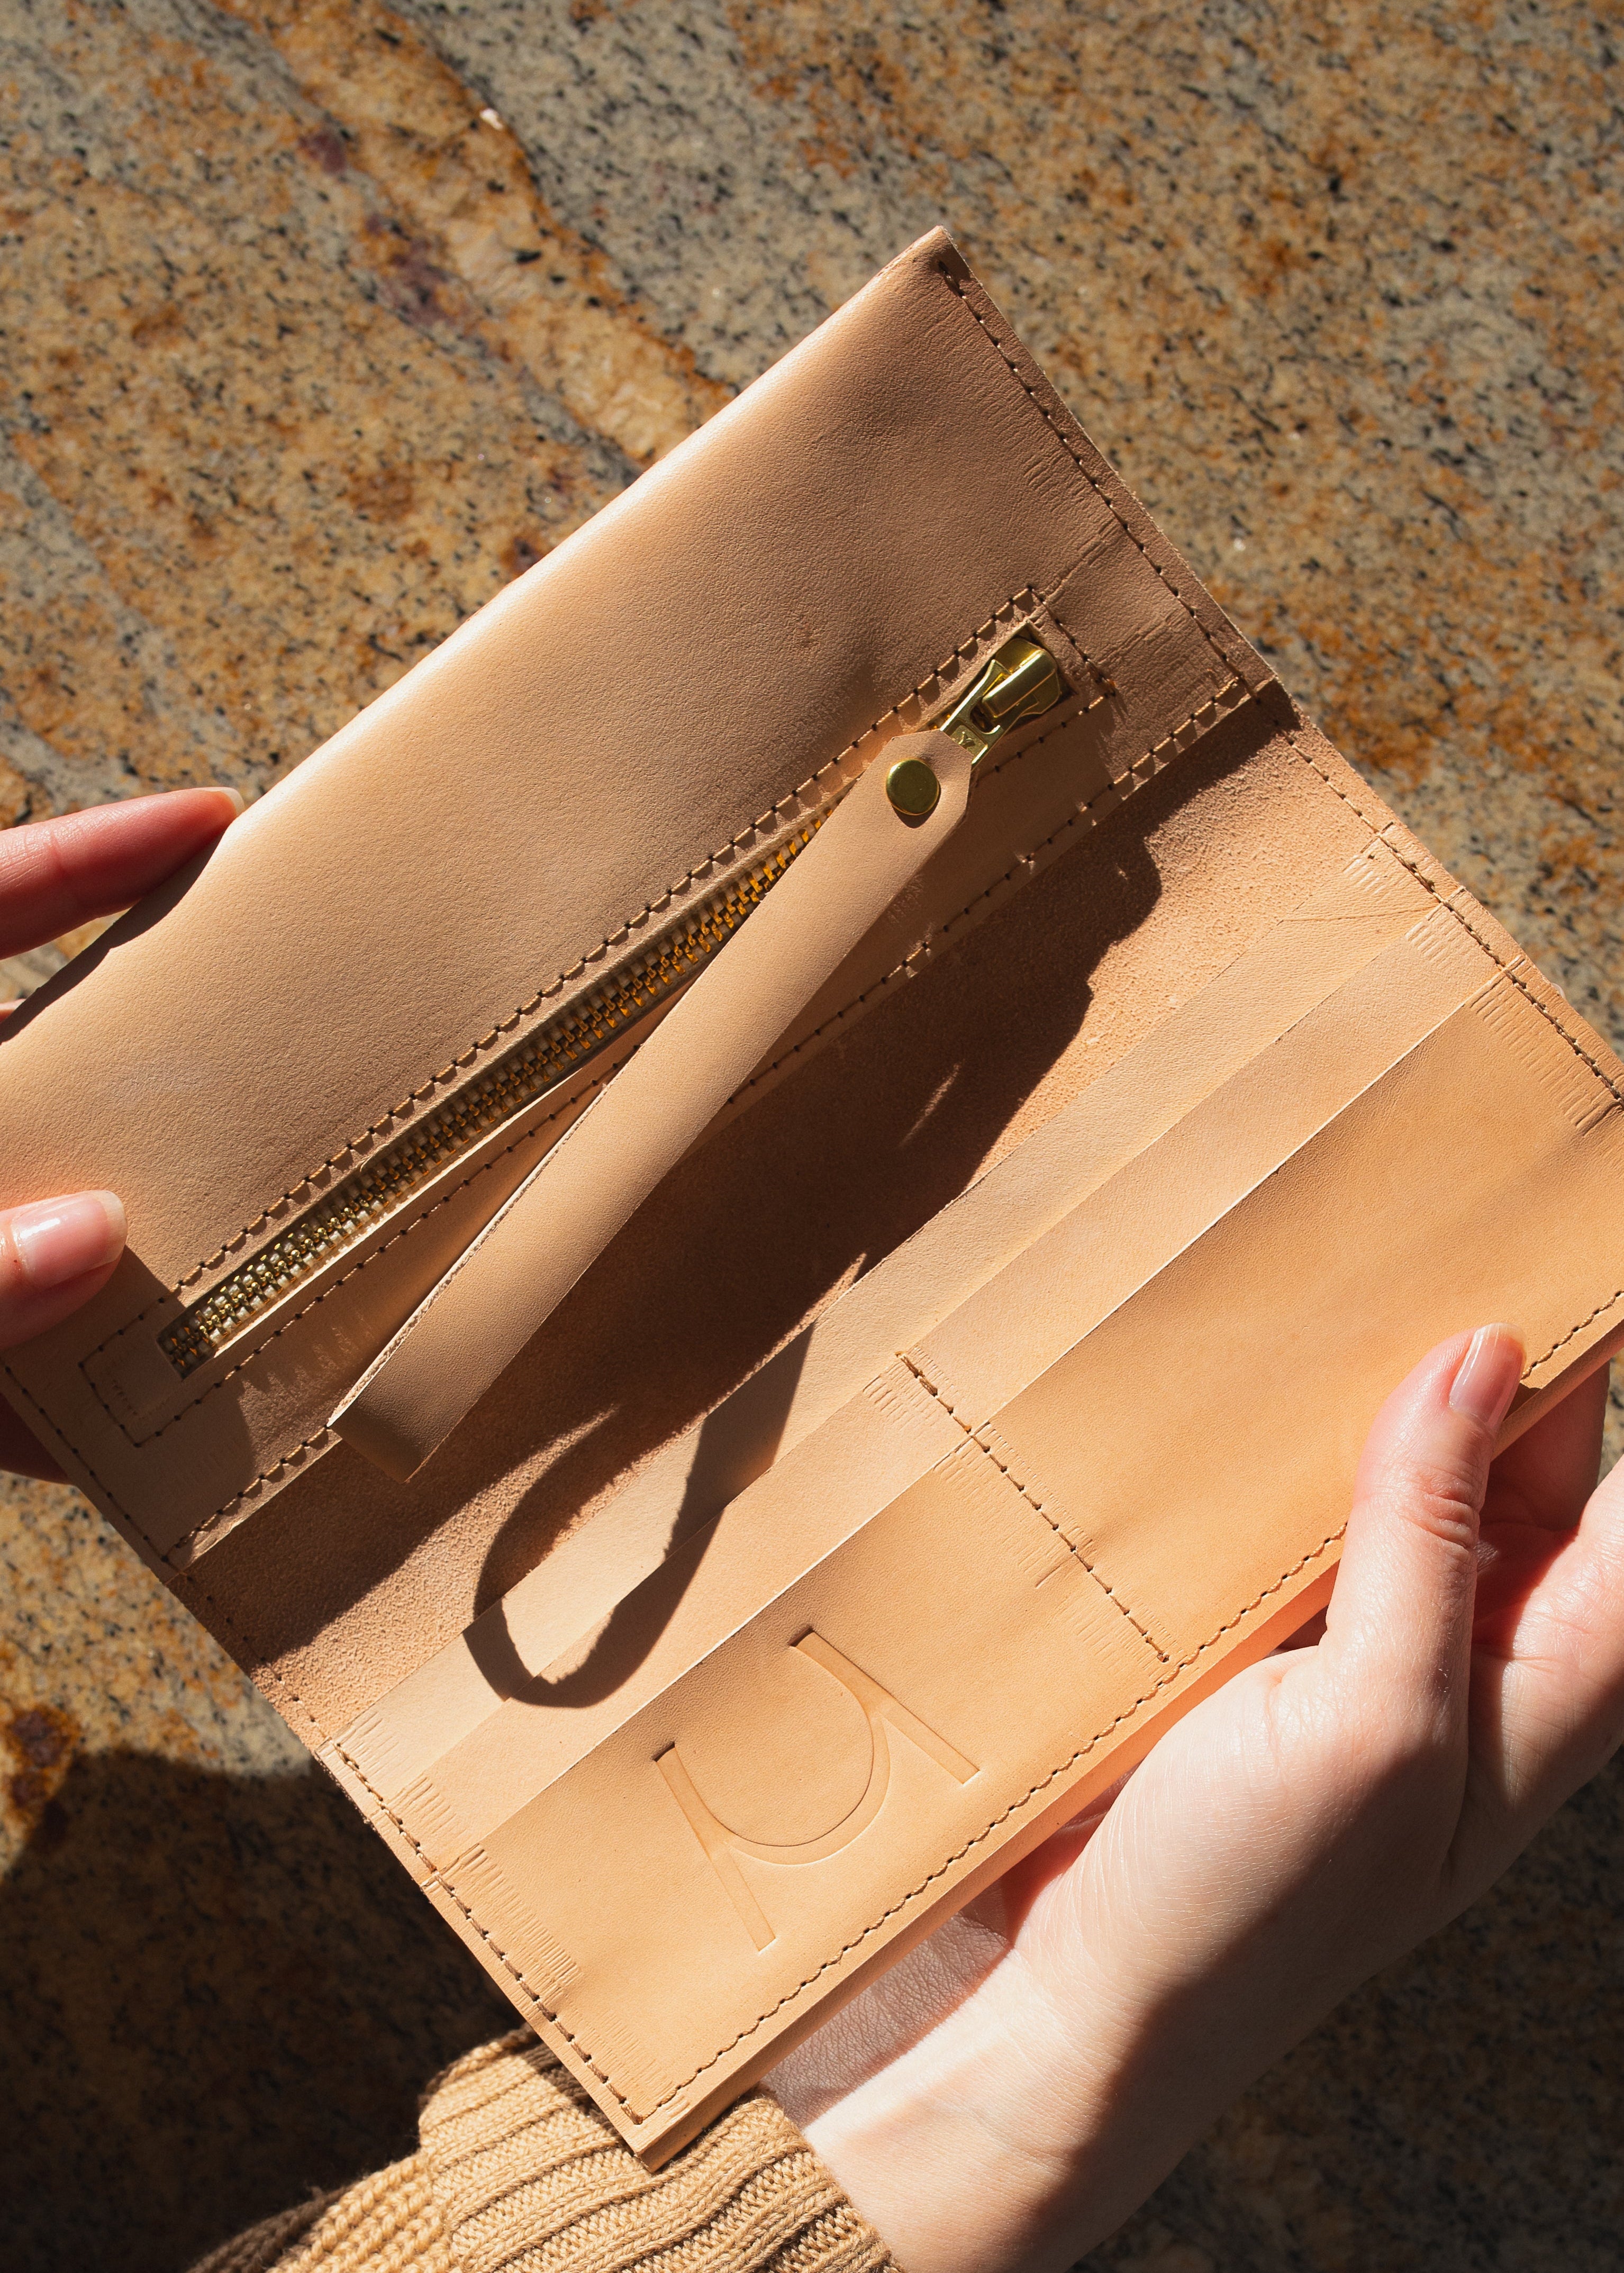 ANGES LEATHER WALLET | NATURAL Leather Bag - handcrafted by Market Canvas Leather in Tofino, BC, Canada